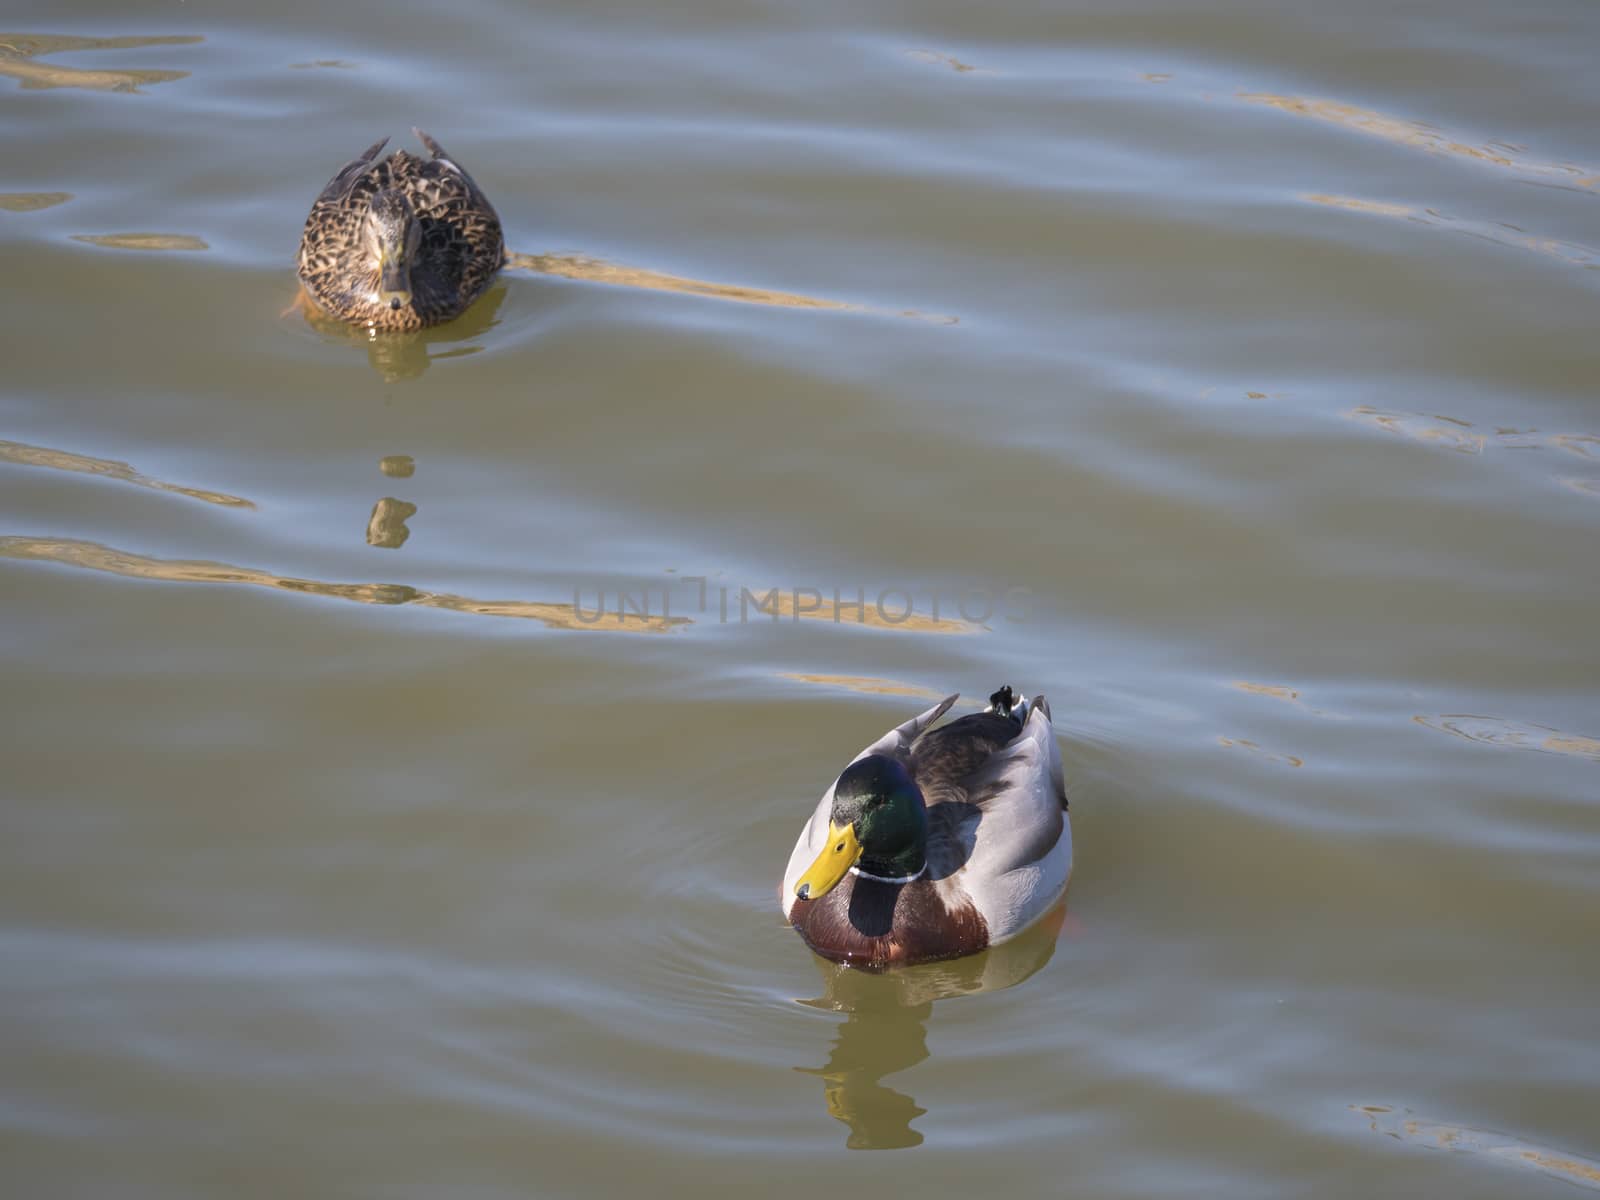 Close up mallard couple, Anas platyrhynchos, male and female duck bird swimming on lake water suface in sunlight. Selective focus.